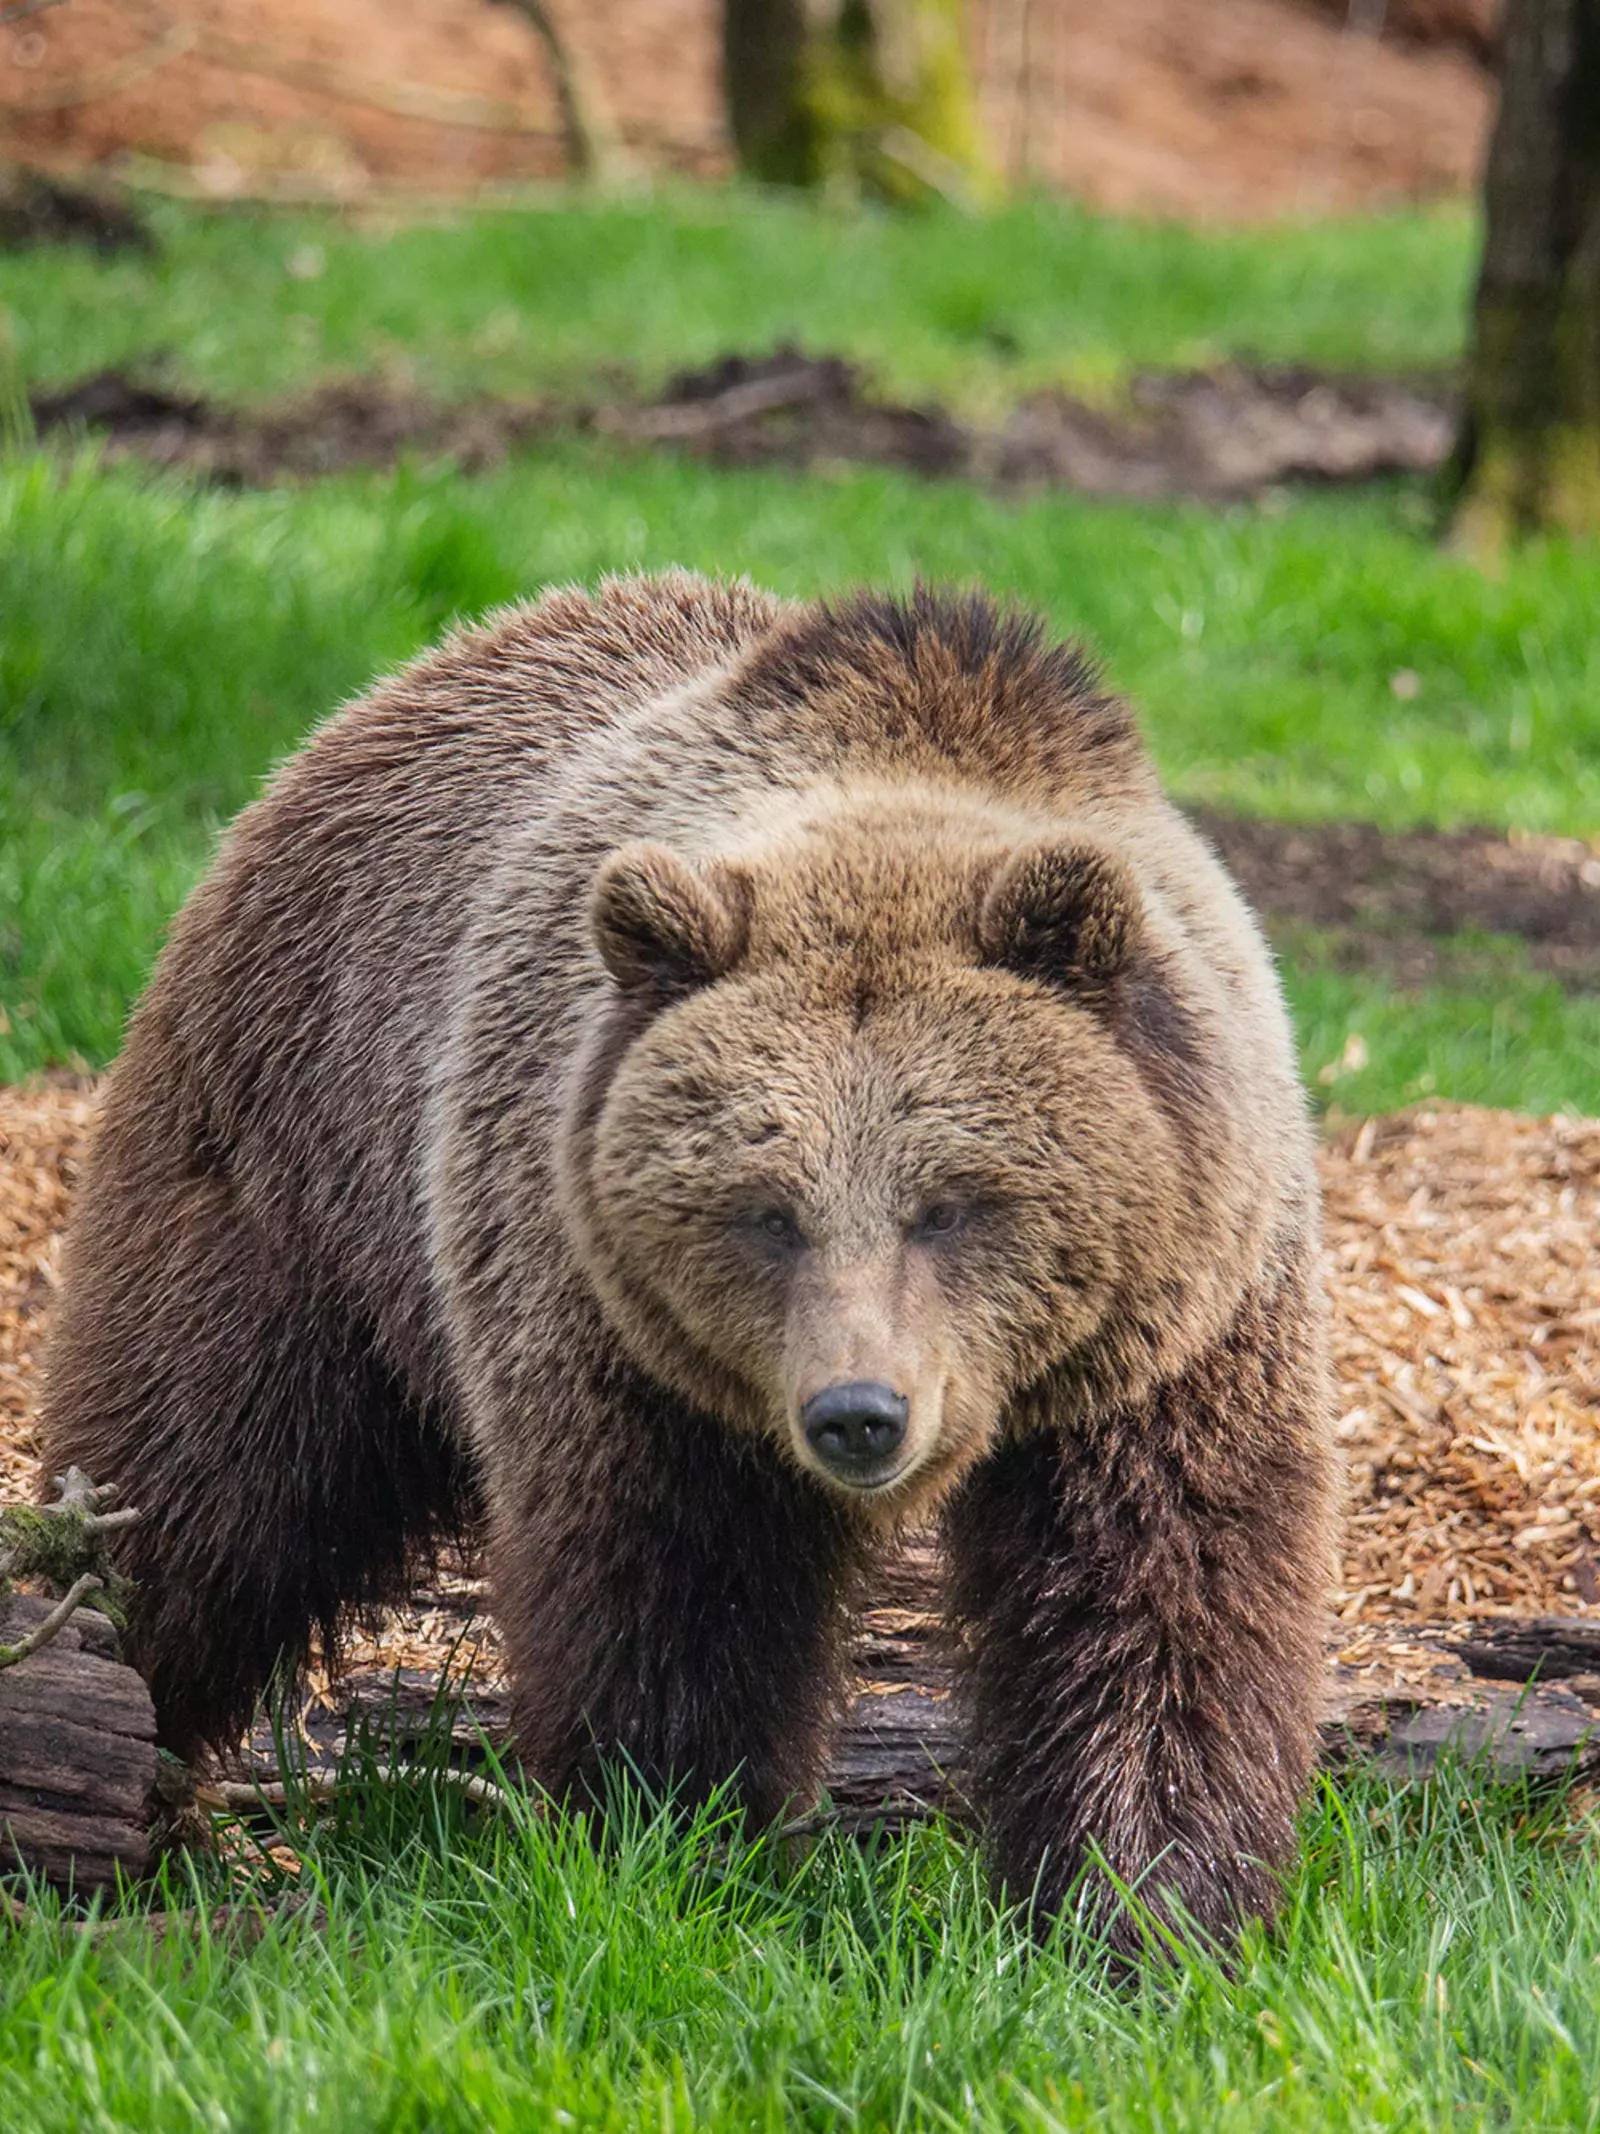 A European brown bear in her woodland home at Whipsnade Zoo